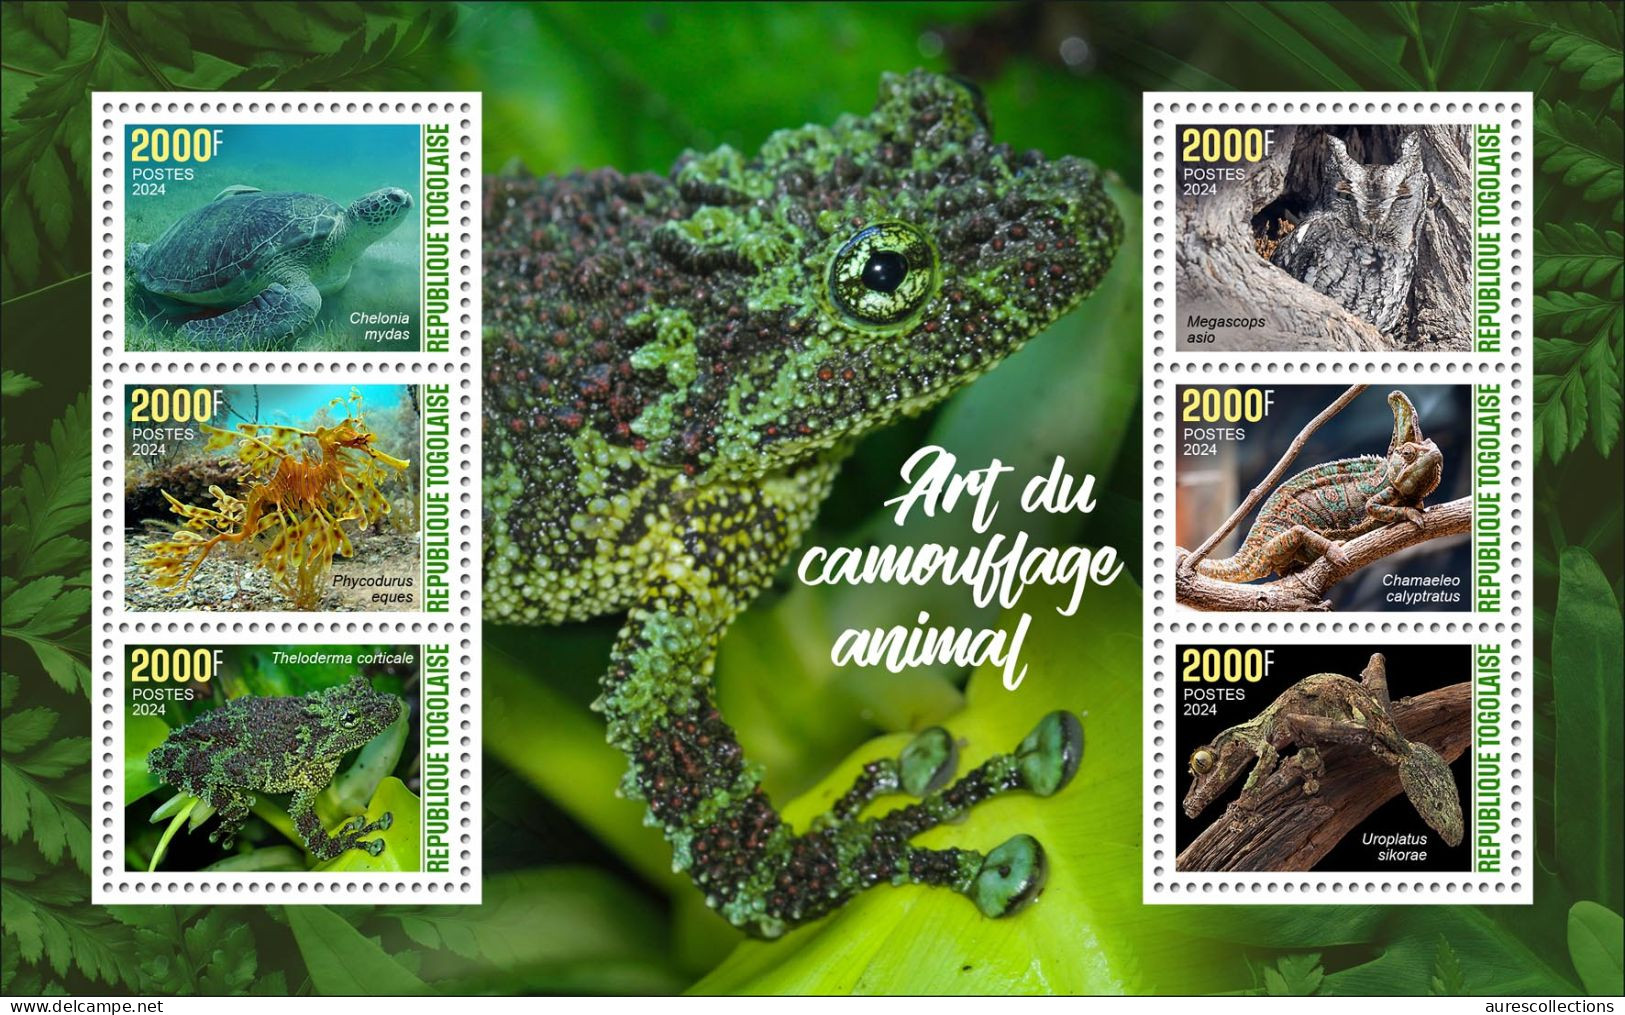 TOGO 2024 MS 6V - CAMOUFLAGE - FROG FROGS TURTLES TURTLE OWL OWLS GECKO CHAMELEON SEAHORSE HIPPOCAMPE REPTILES - MNH - Hiboux & Chouettes